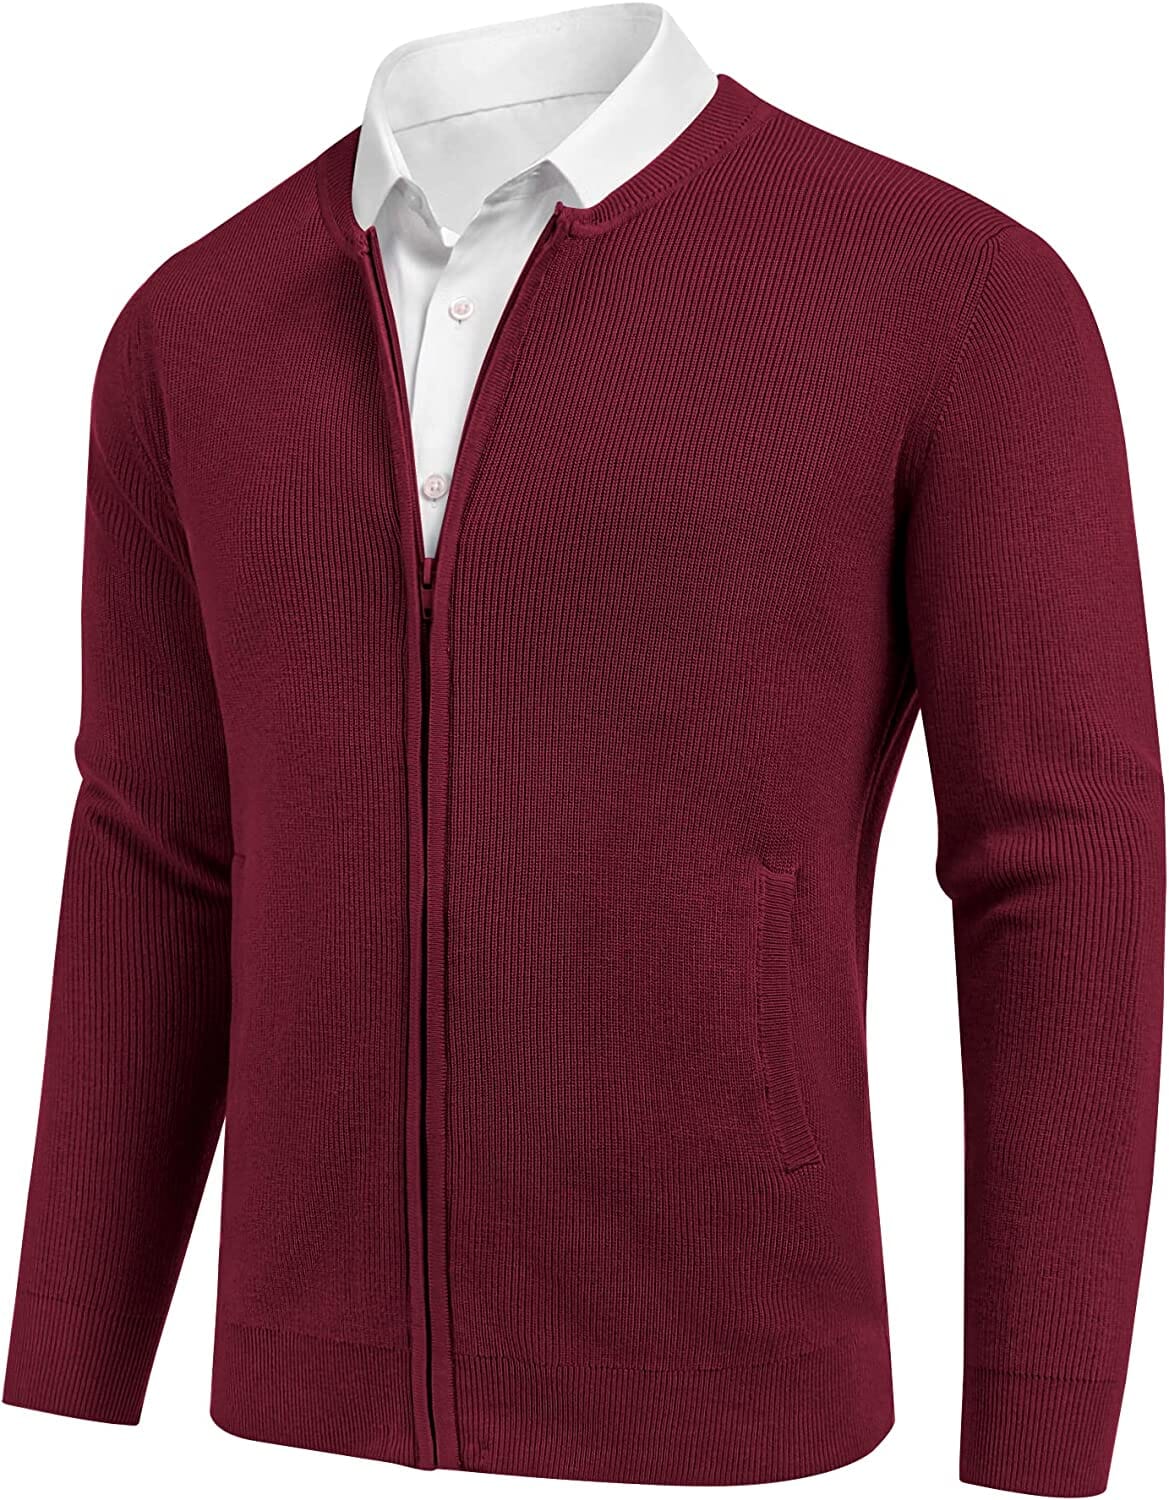 Full Zip Slim Fit Stylish Knitted Cardigan Sweater with Pockets (US Only) Sweaters COOFANDY Store Solid Wine Red S 